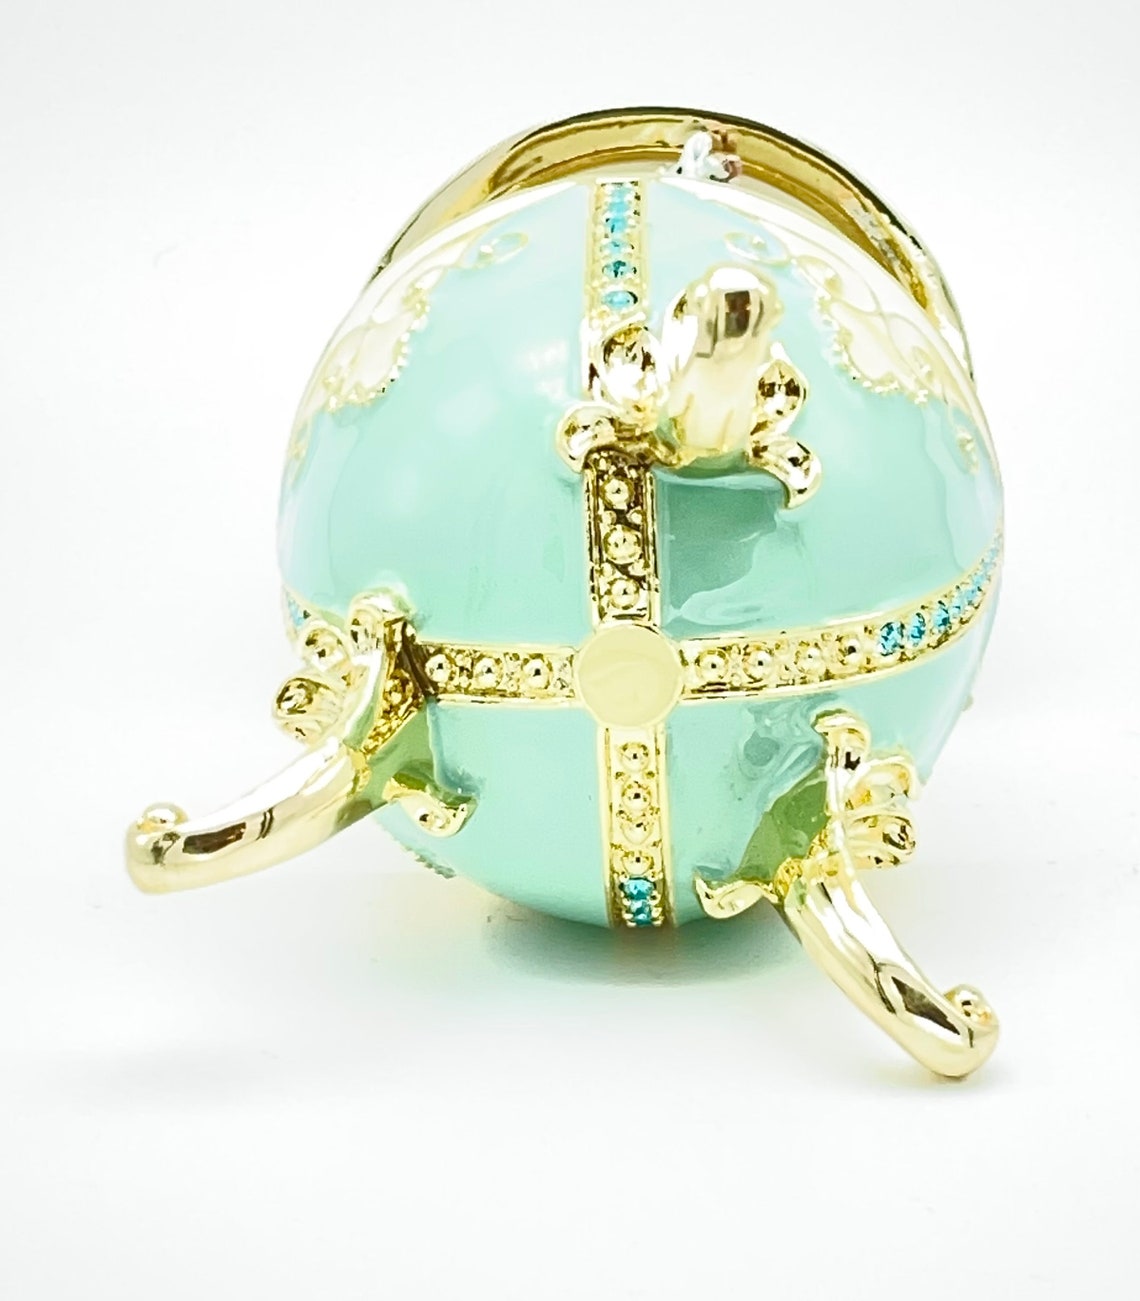 Faberge Egg with Music Royal Horses Carousel